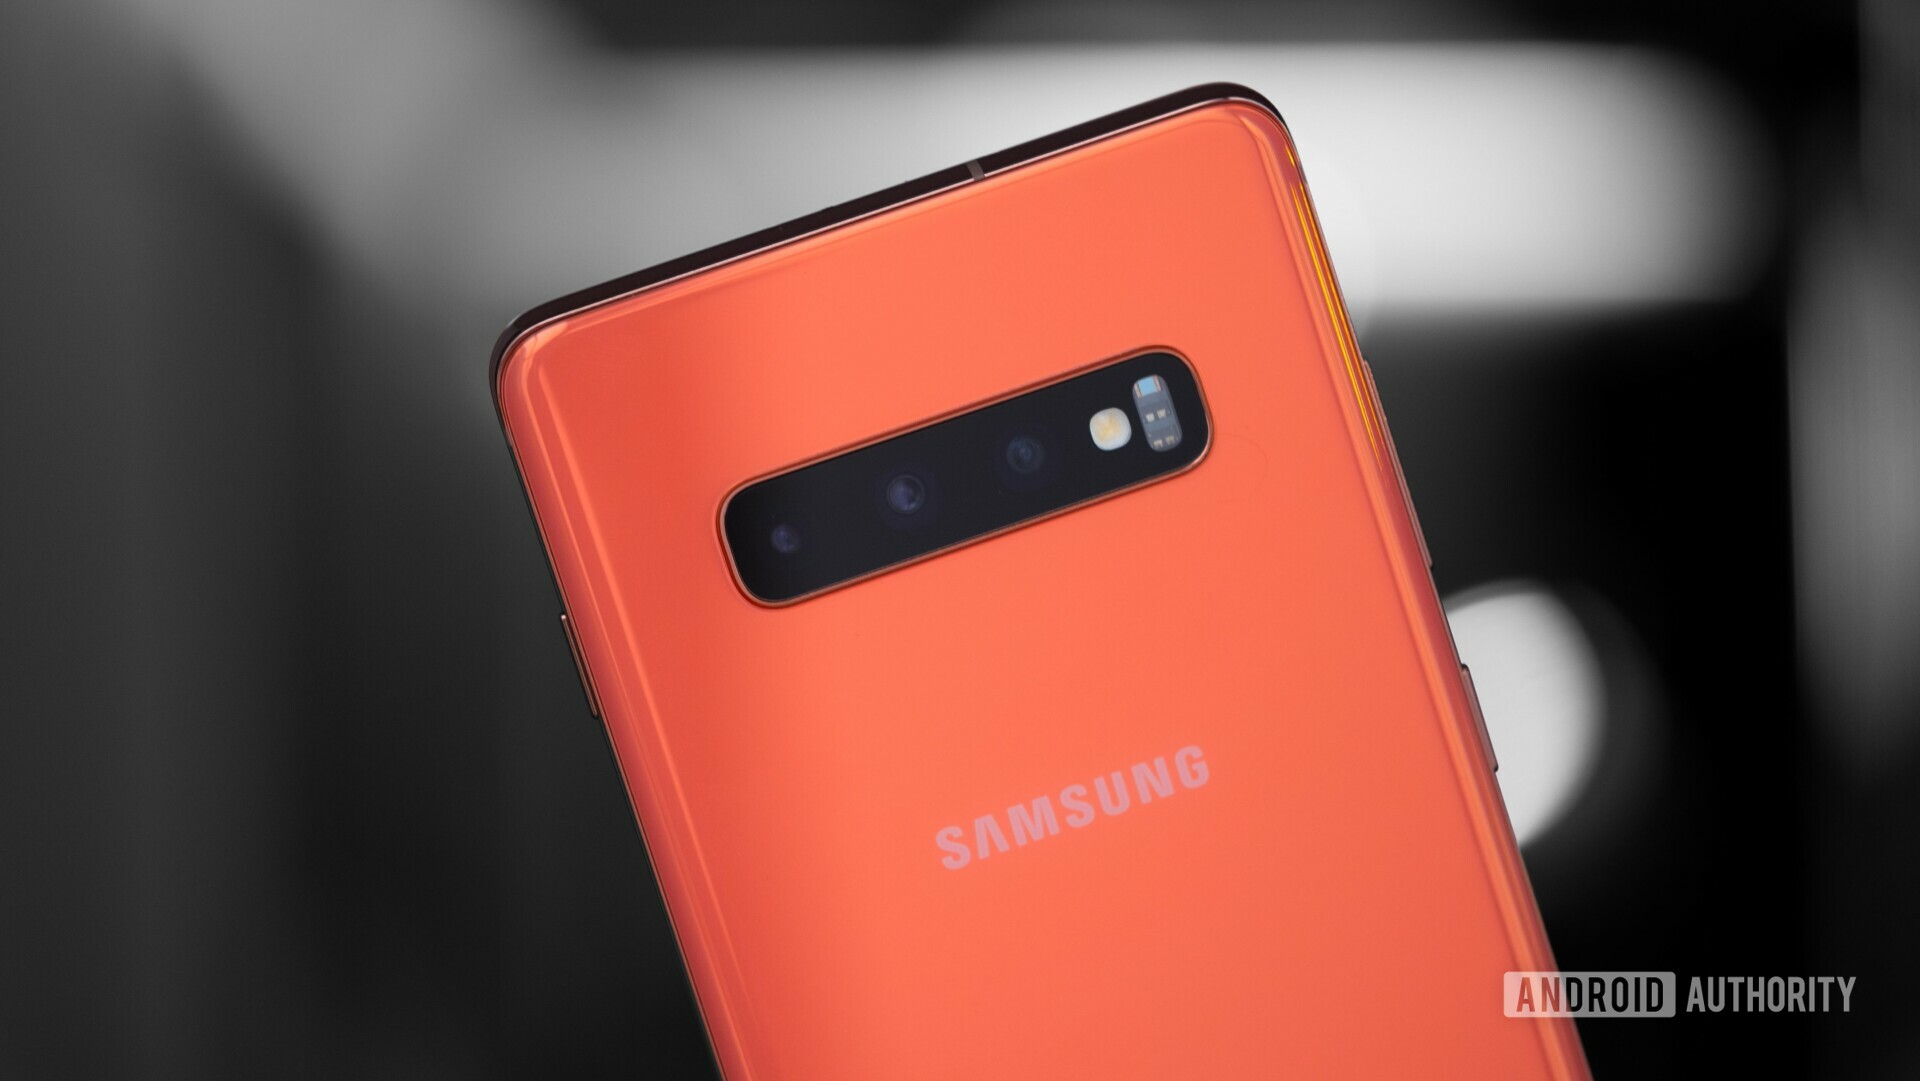 Photo of the back side tripple cameras on an orange Samsung Galaxy S10 Plus